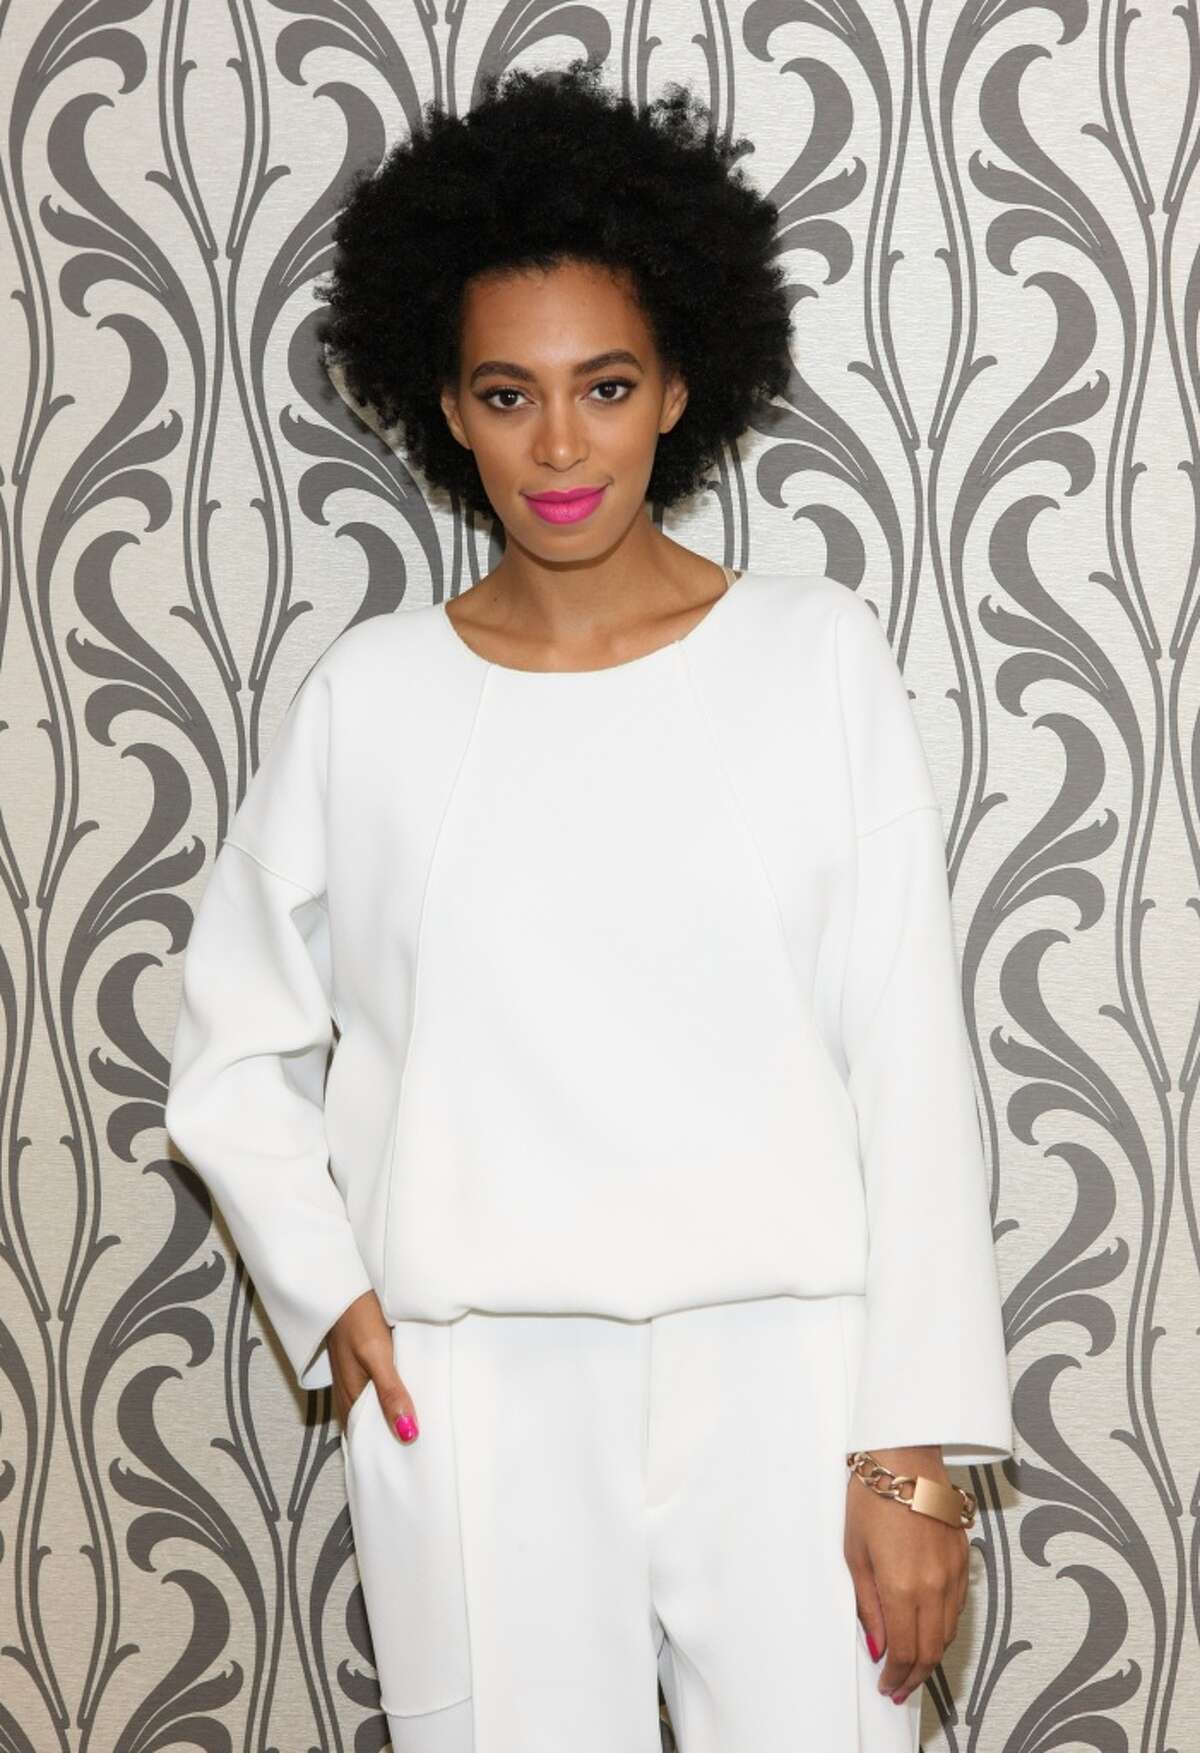 Don't forget about Beyonce's little sis, Solange, who was also born in Houston.